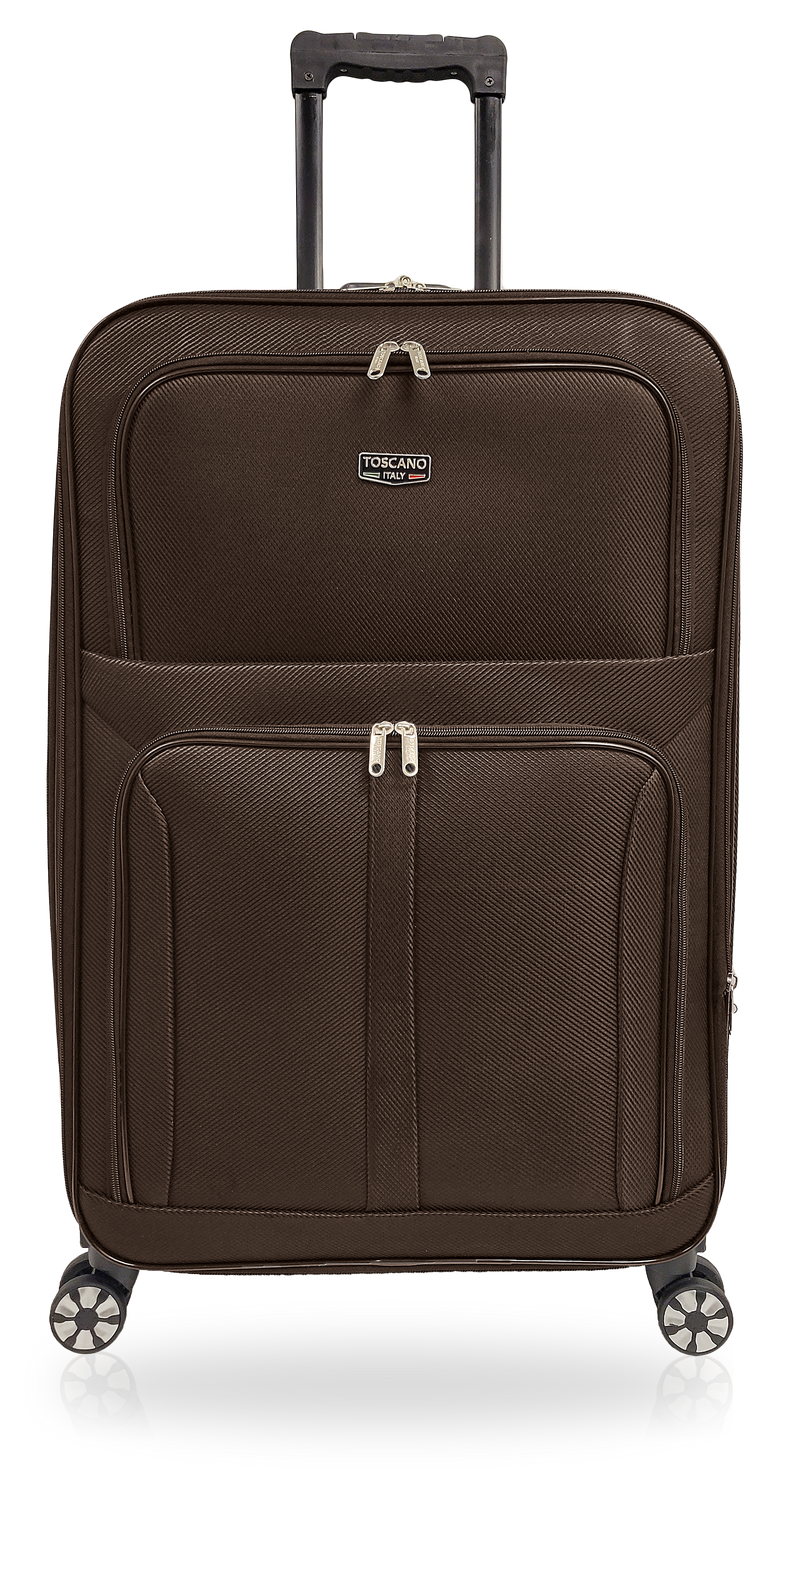 TOSCANO by Tucci Aiutante 31-inch Lightweight Luggage Suitcase